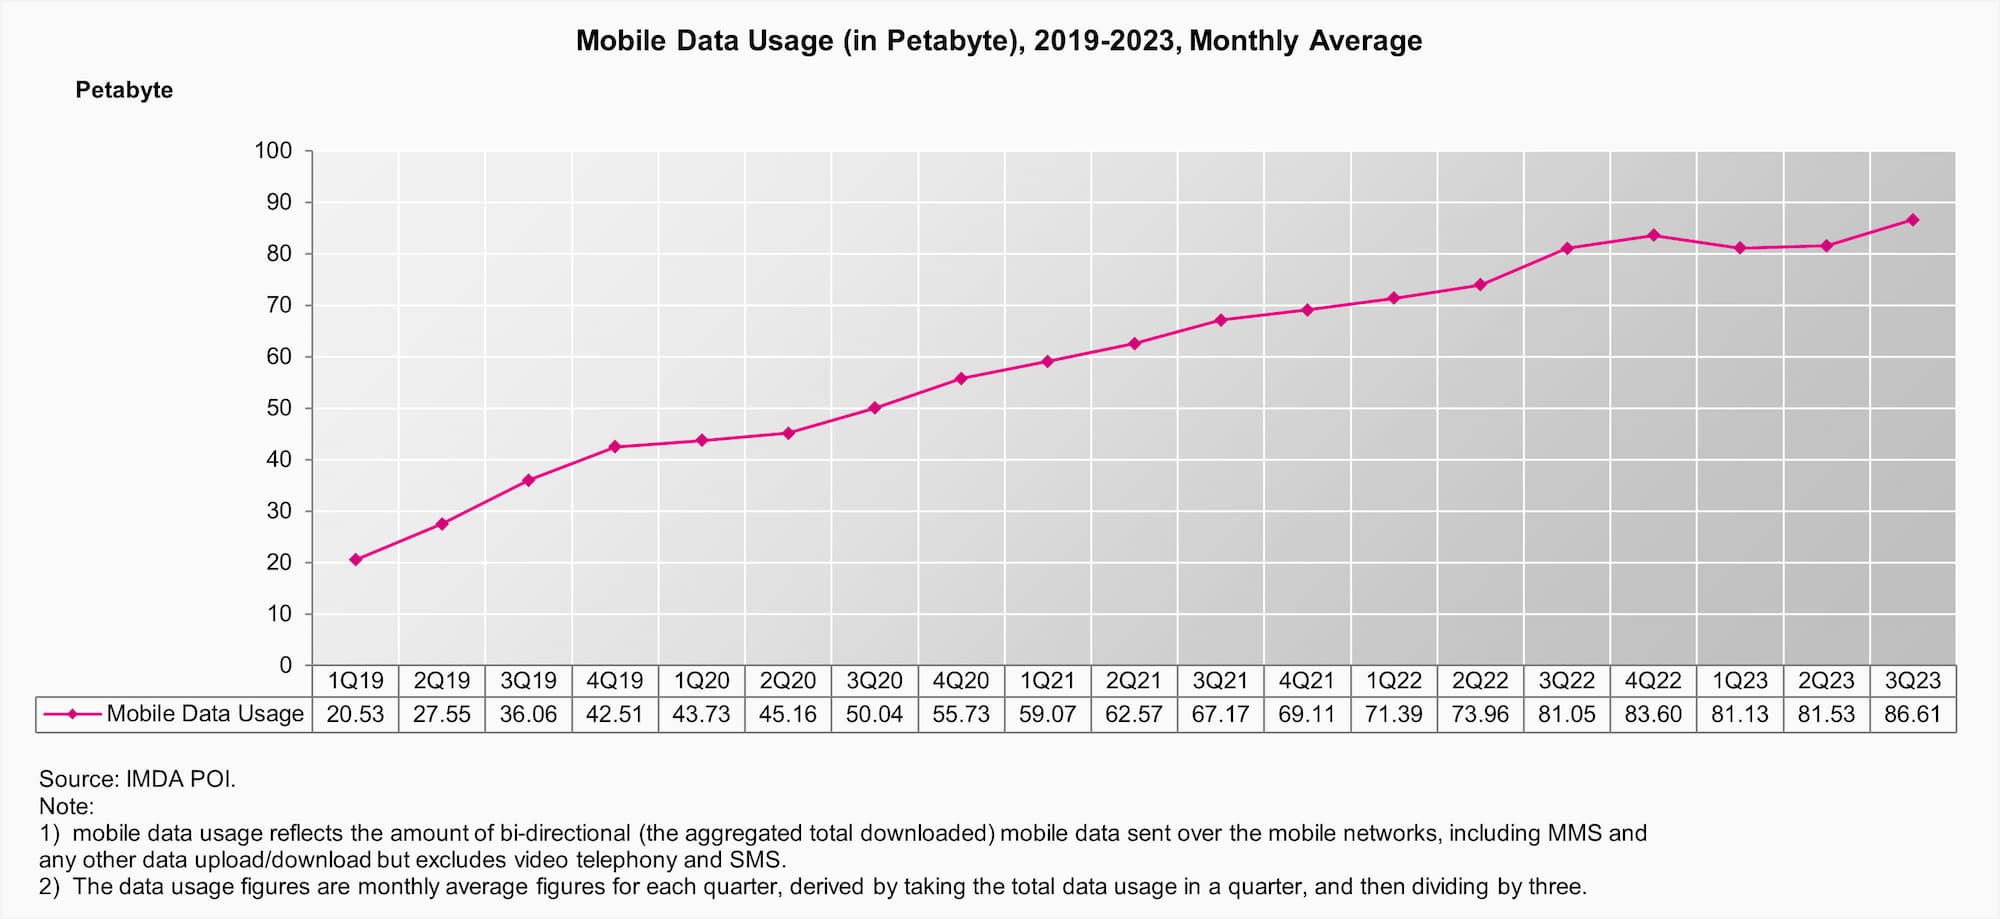 Q3 Mobile Data Usage (in Petabyte)